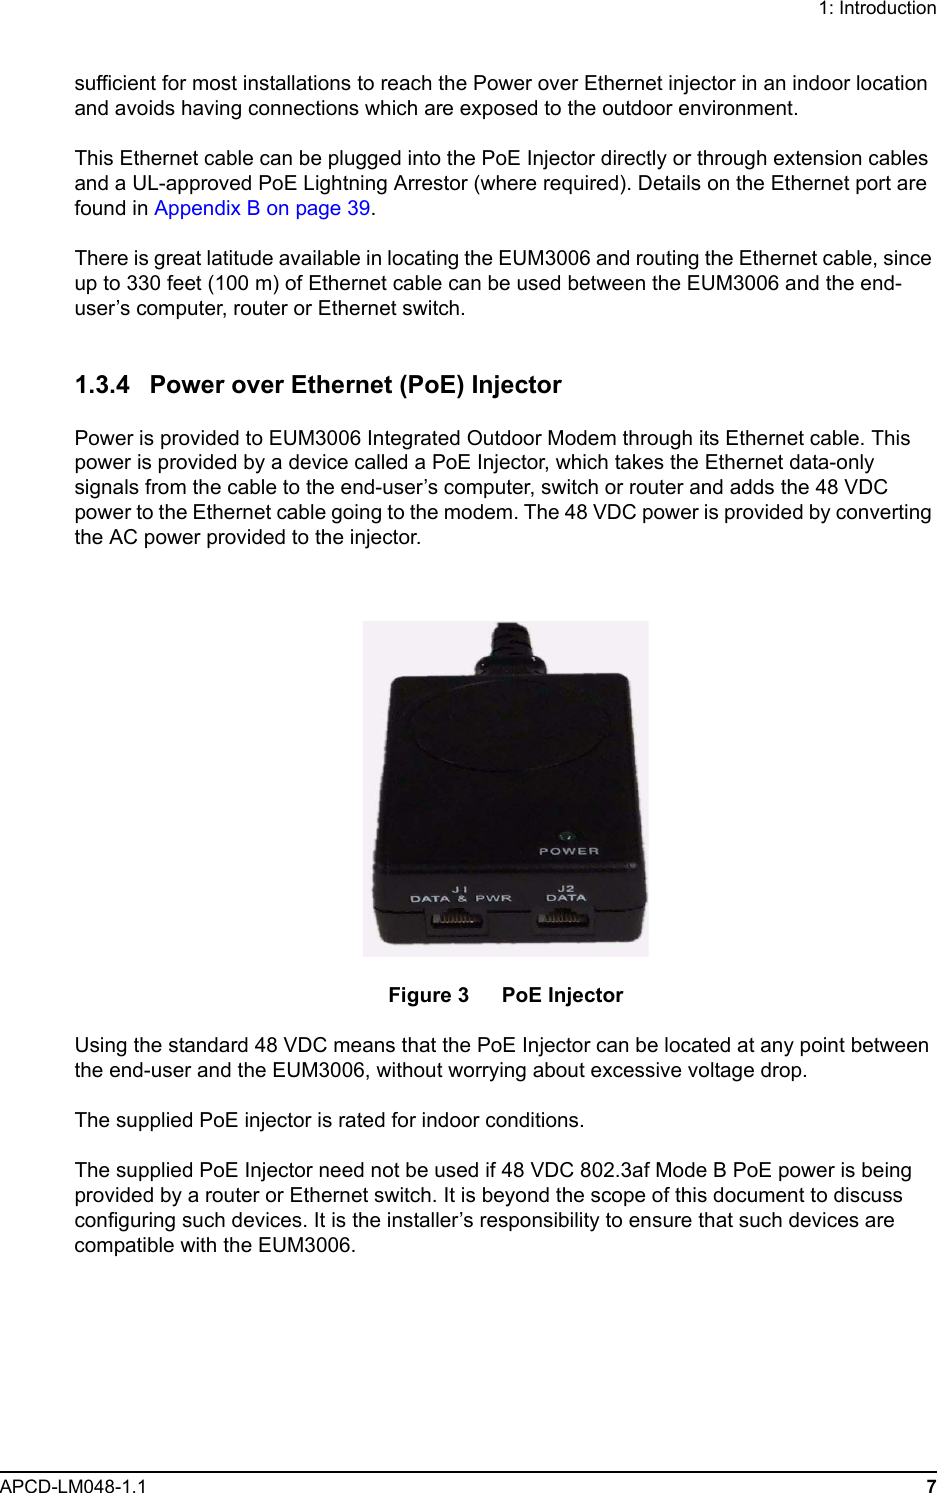 1: IntroductionAPCD-LM048-1.1 7sufficient for most installations to reach the Power over Ethernet injector in an indoor location and avoids having connections which are exposed to the outdoor environment.This Ethernet cable can be plugged into the PoE Injector directly or through extension cables and a UL-approved PoE Lightning Arrestor (where required). Details on the Ethernet port are found in Appendix B on page 39.There is great latitude available in locating the EUM3006 and routing the Ethernet cable, since up to 330 feet (100 m) of Ethernet cable can be used between the EUM3006 and the end-user’s computer, router or Ethernet switch. 1.3.4 Power over Ethernet (PoE) InjectorPower is provided to EUM3006 Integrated Outdoor Modem through its Ethernet cable. This power is provided by a device called a PoE Injector, which takes the Ethernet data-only signals from the cable to the end-user’s computer, switch or router and adds the 48 VDC power to the Ethernet cable going to the modem. The 48 VDC power is provided by converting the AC power provided to the injector.Figure 3   PoE InjectorUsing the standard 48 VDC means that the PoE Injector can be located at any point between the end-user and the EUM3006, without worrying about excessive voltage drop. The supplied PoE injector is rated for indoor conditions. The supplied PoE Injector need not be used if 48 VDC 802.3af Mode B PoE power is being provided by a router or Ethernet switch. It is beyond the scope of this document to discuss configuring such devices. It is the installer’s responsibility to ensure that such devices are compatible with the EUM3006.